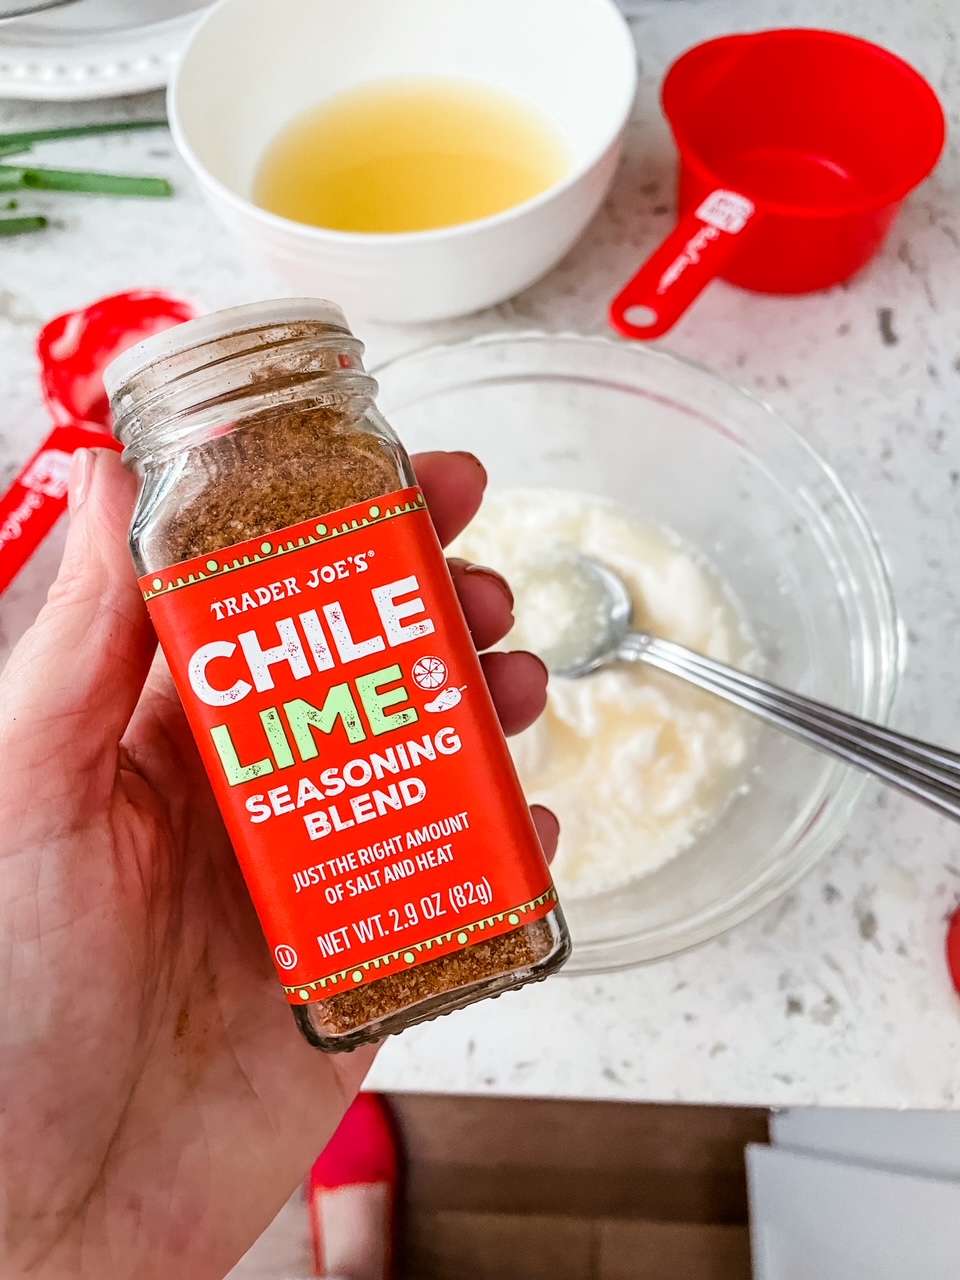 The chile lime seasoning from Trader Joe's